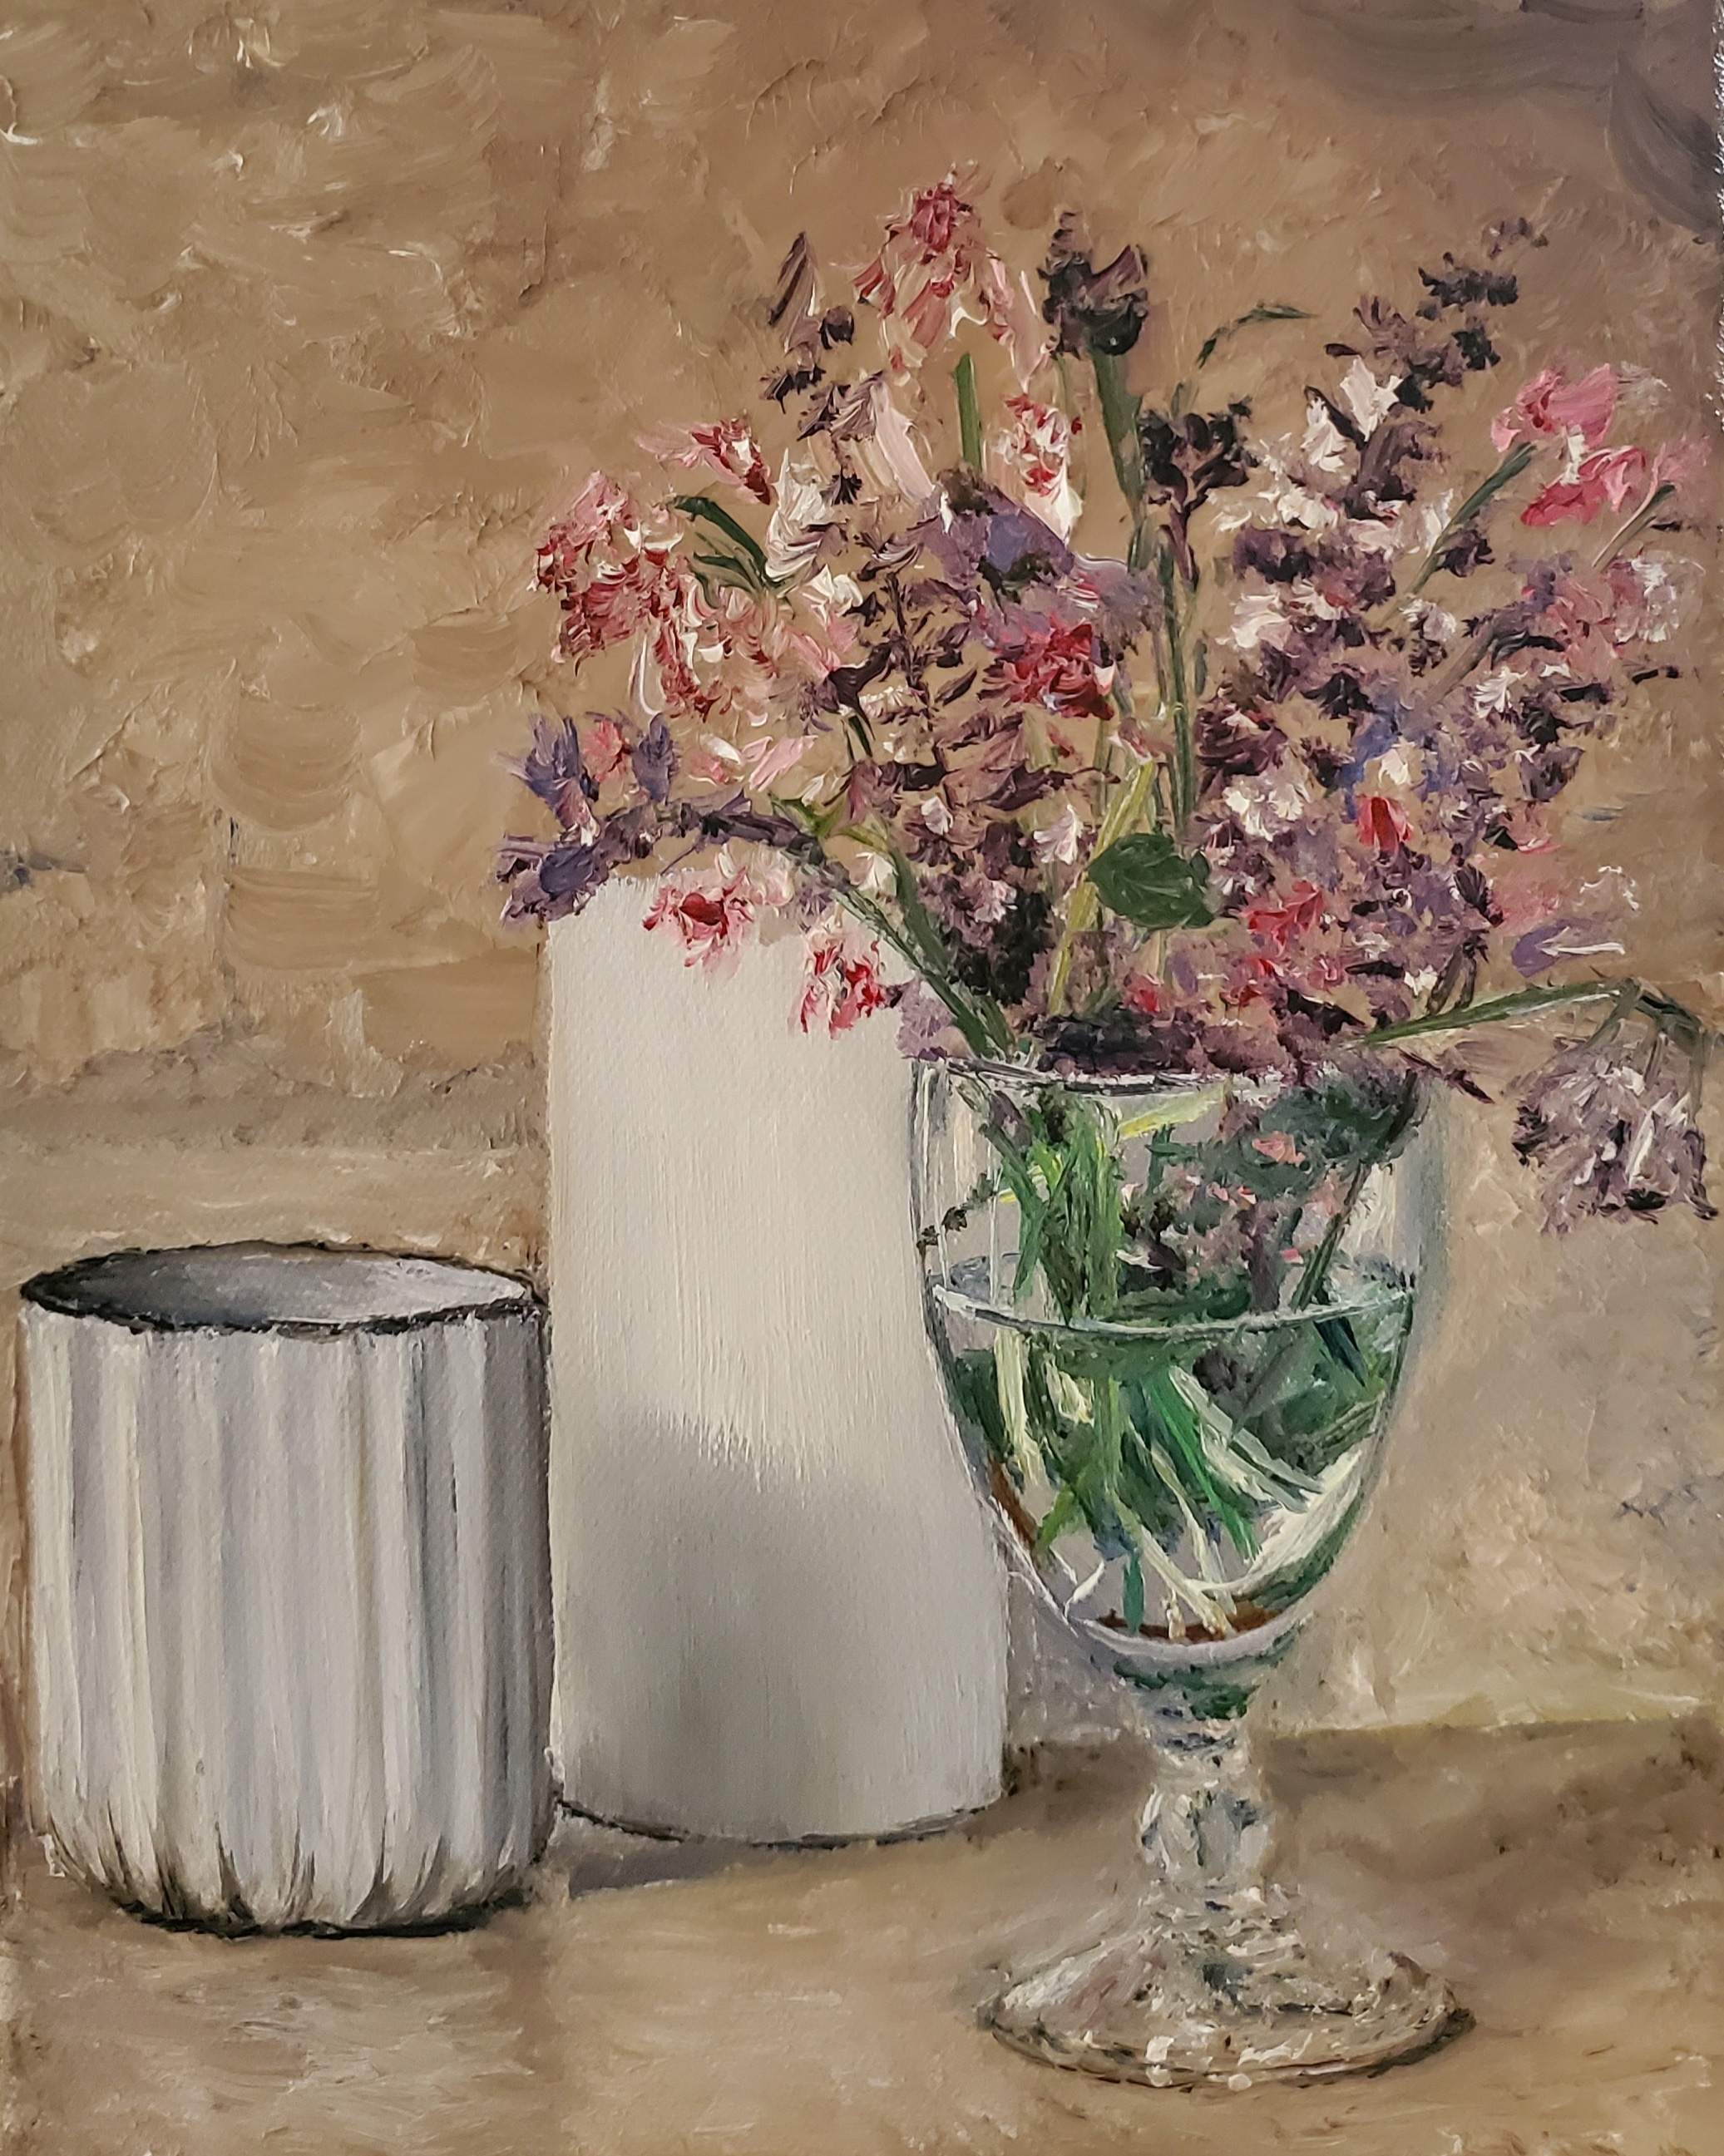 Still Life with Flowers; oil on canvas; 2019